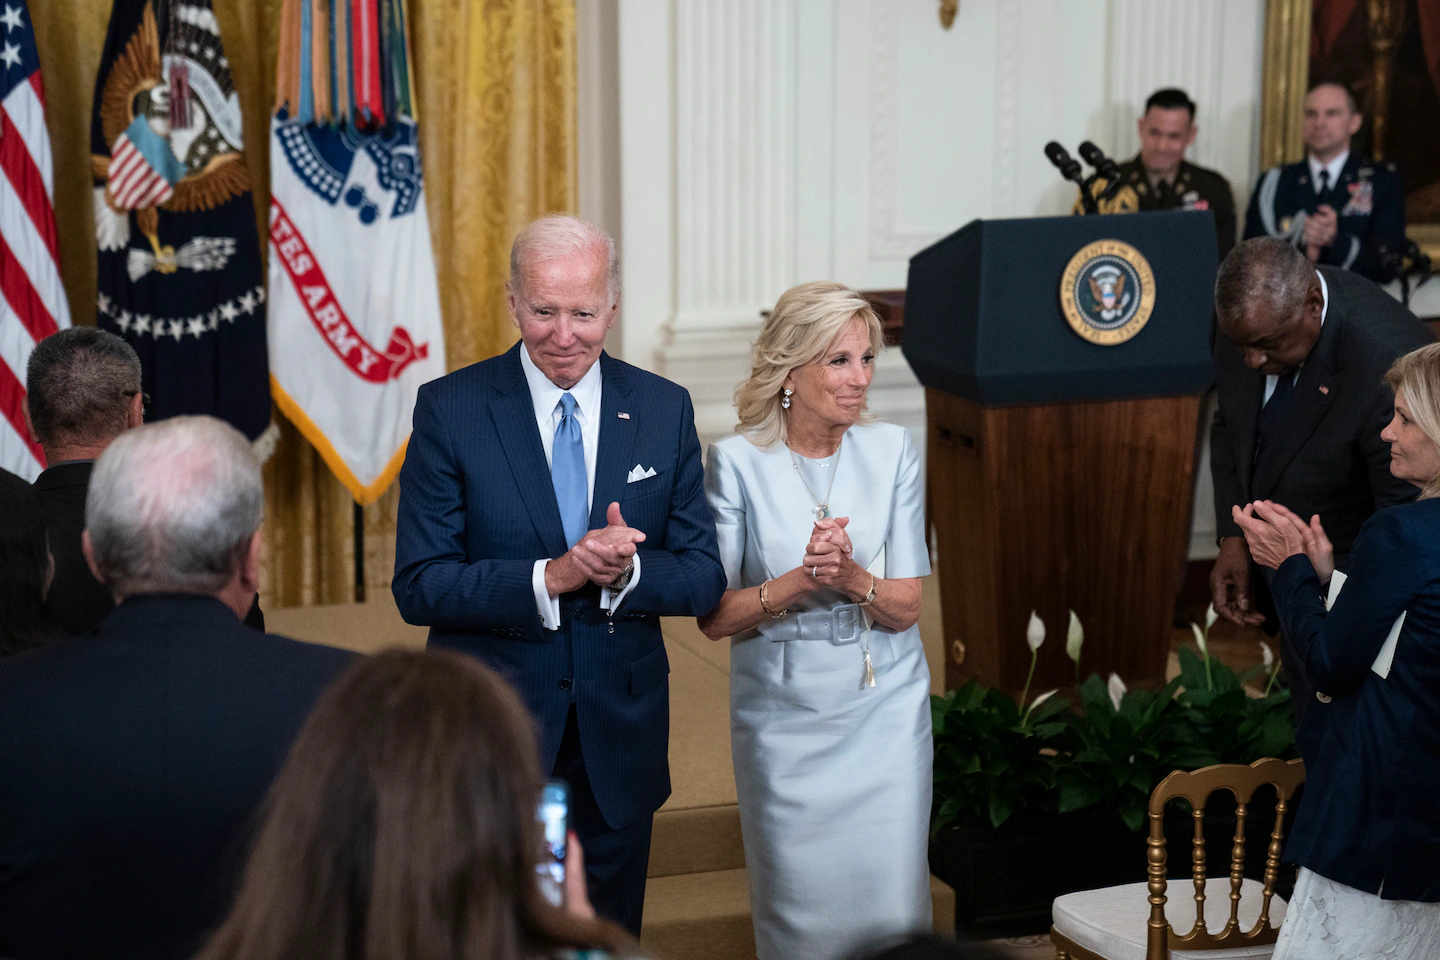 Opinion | White House reporters object to exclusion from Biden events